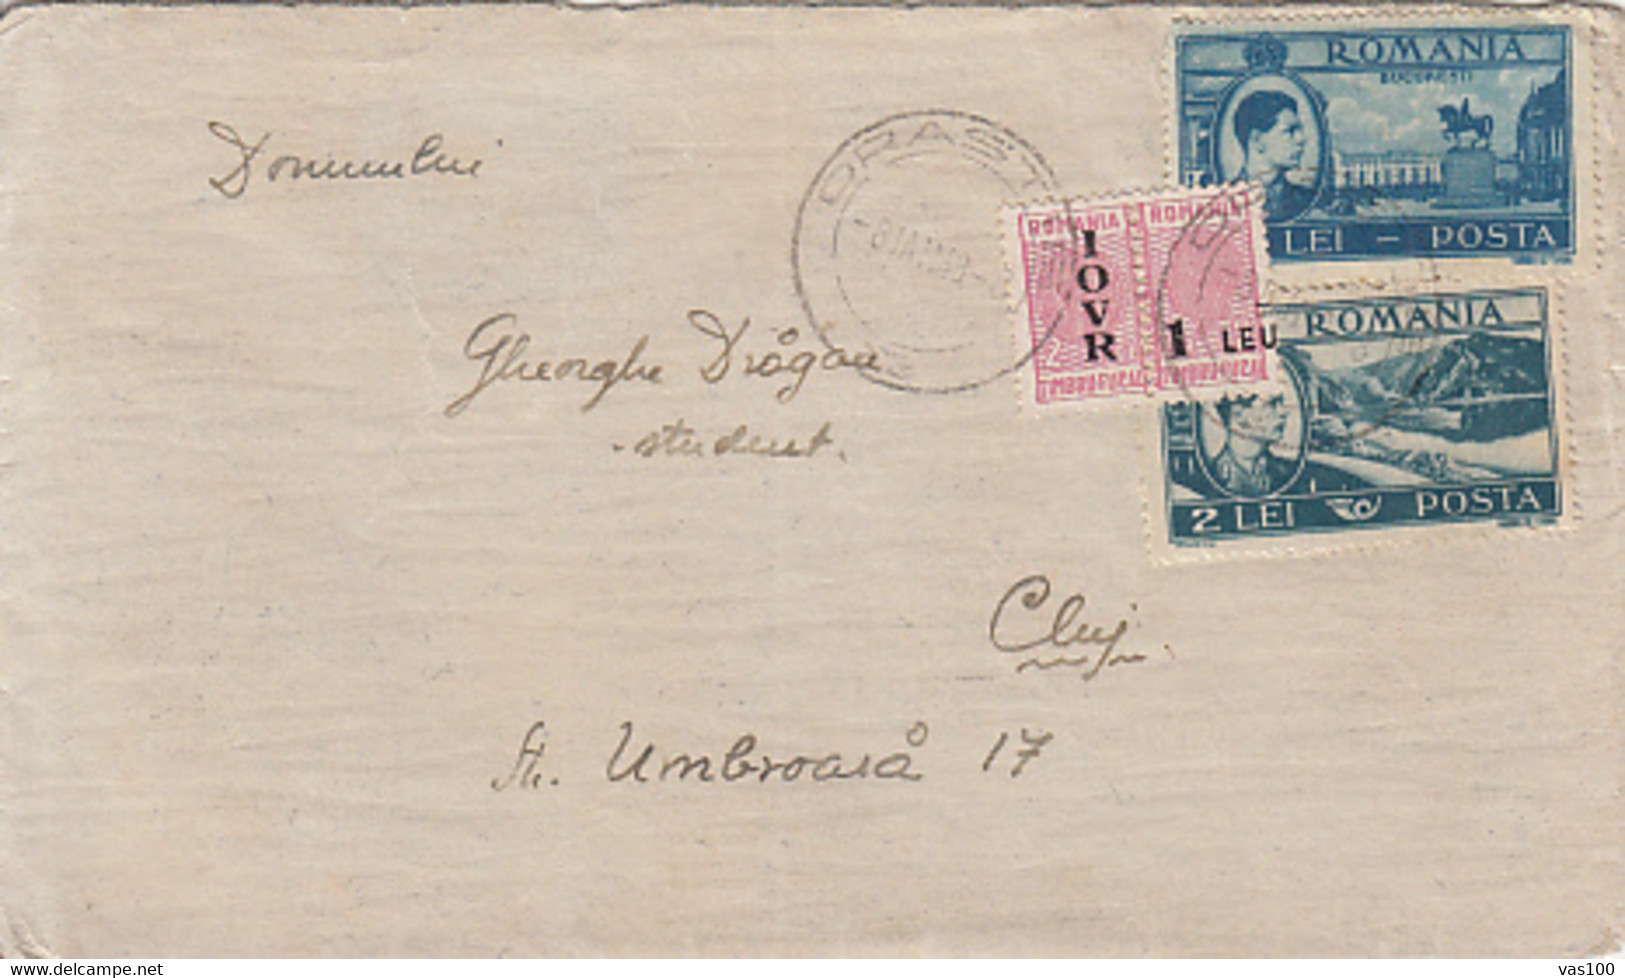 IOVR OVERPRINT REVENUE STAMP, KING MICHAEL, DANUBE, SHIP, BUCHAREST STATUE STAMPS ON COVER, 1948, ROMANIA - Fiscaux